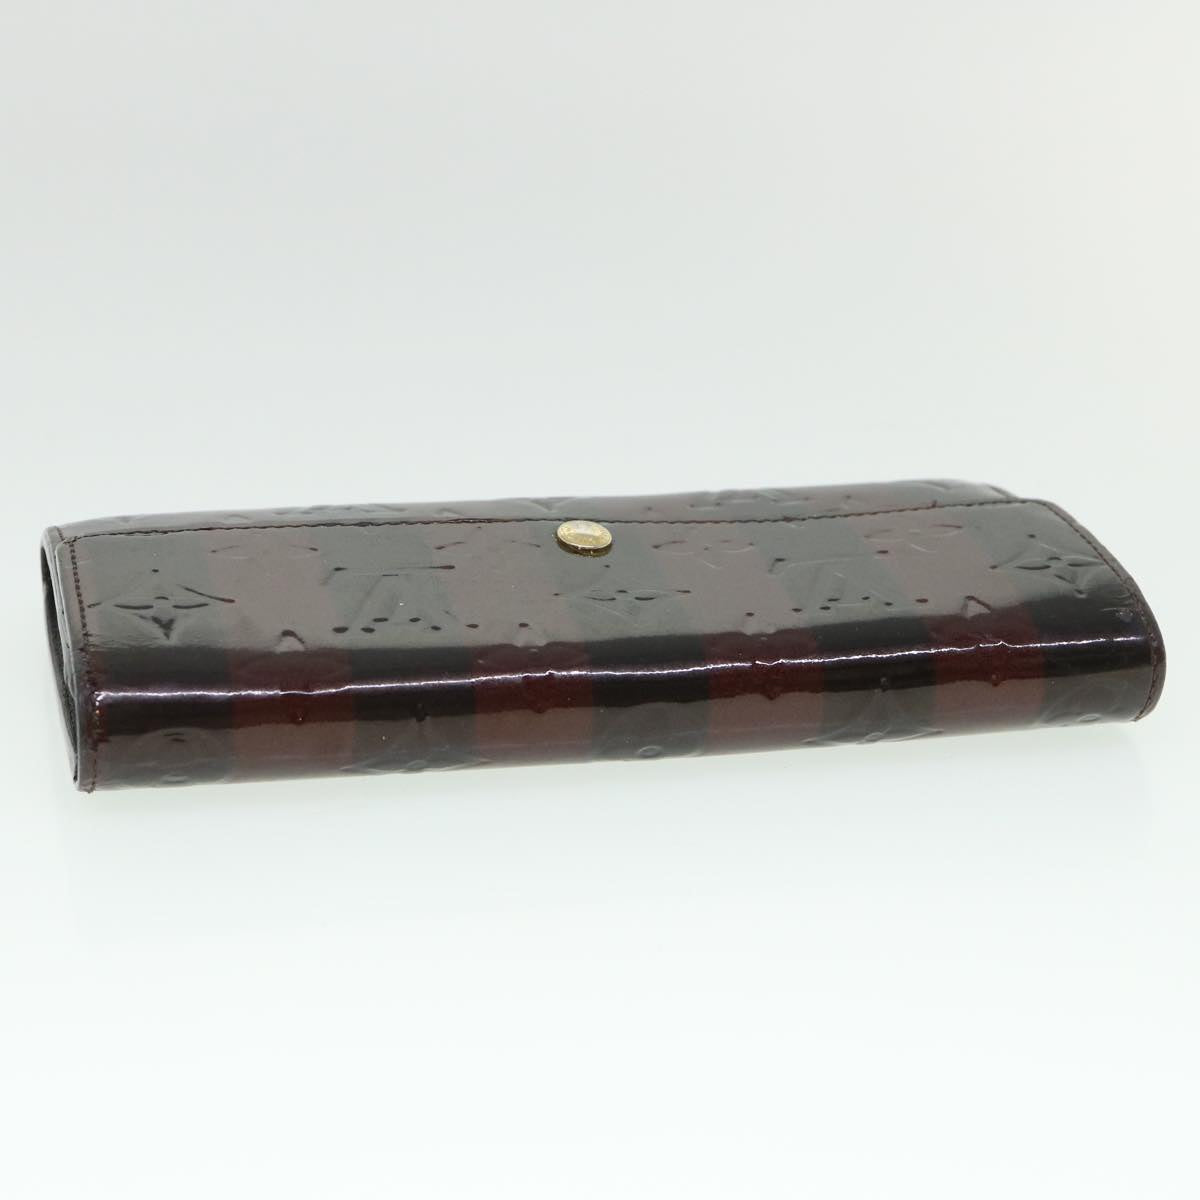 LOUIS VUITTON Vernis Rayure Portefeiulle Sarah Wallet Red M91716 LV Auth 55617